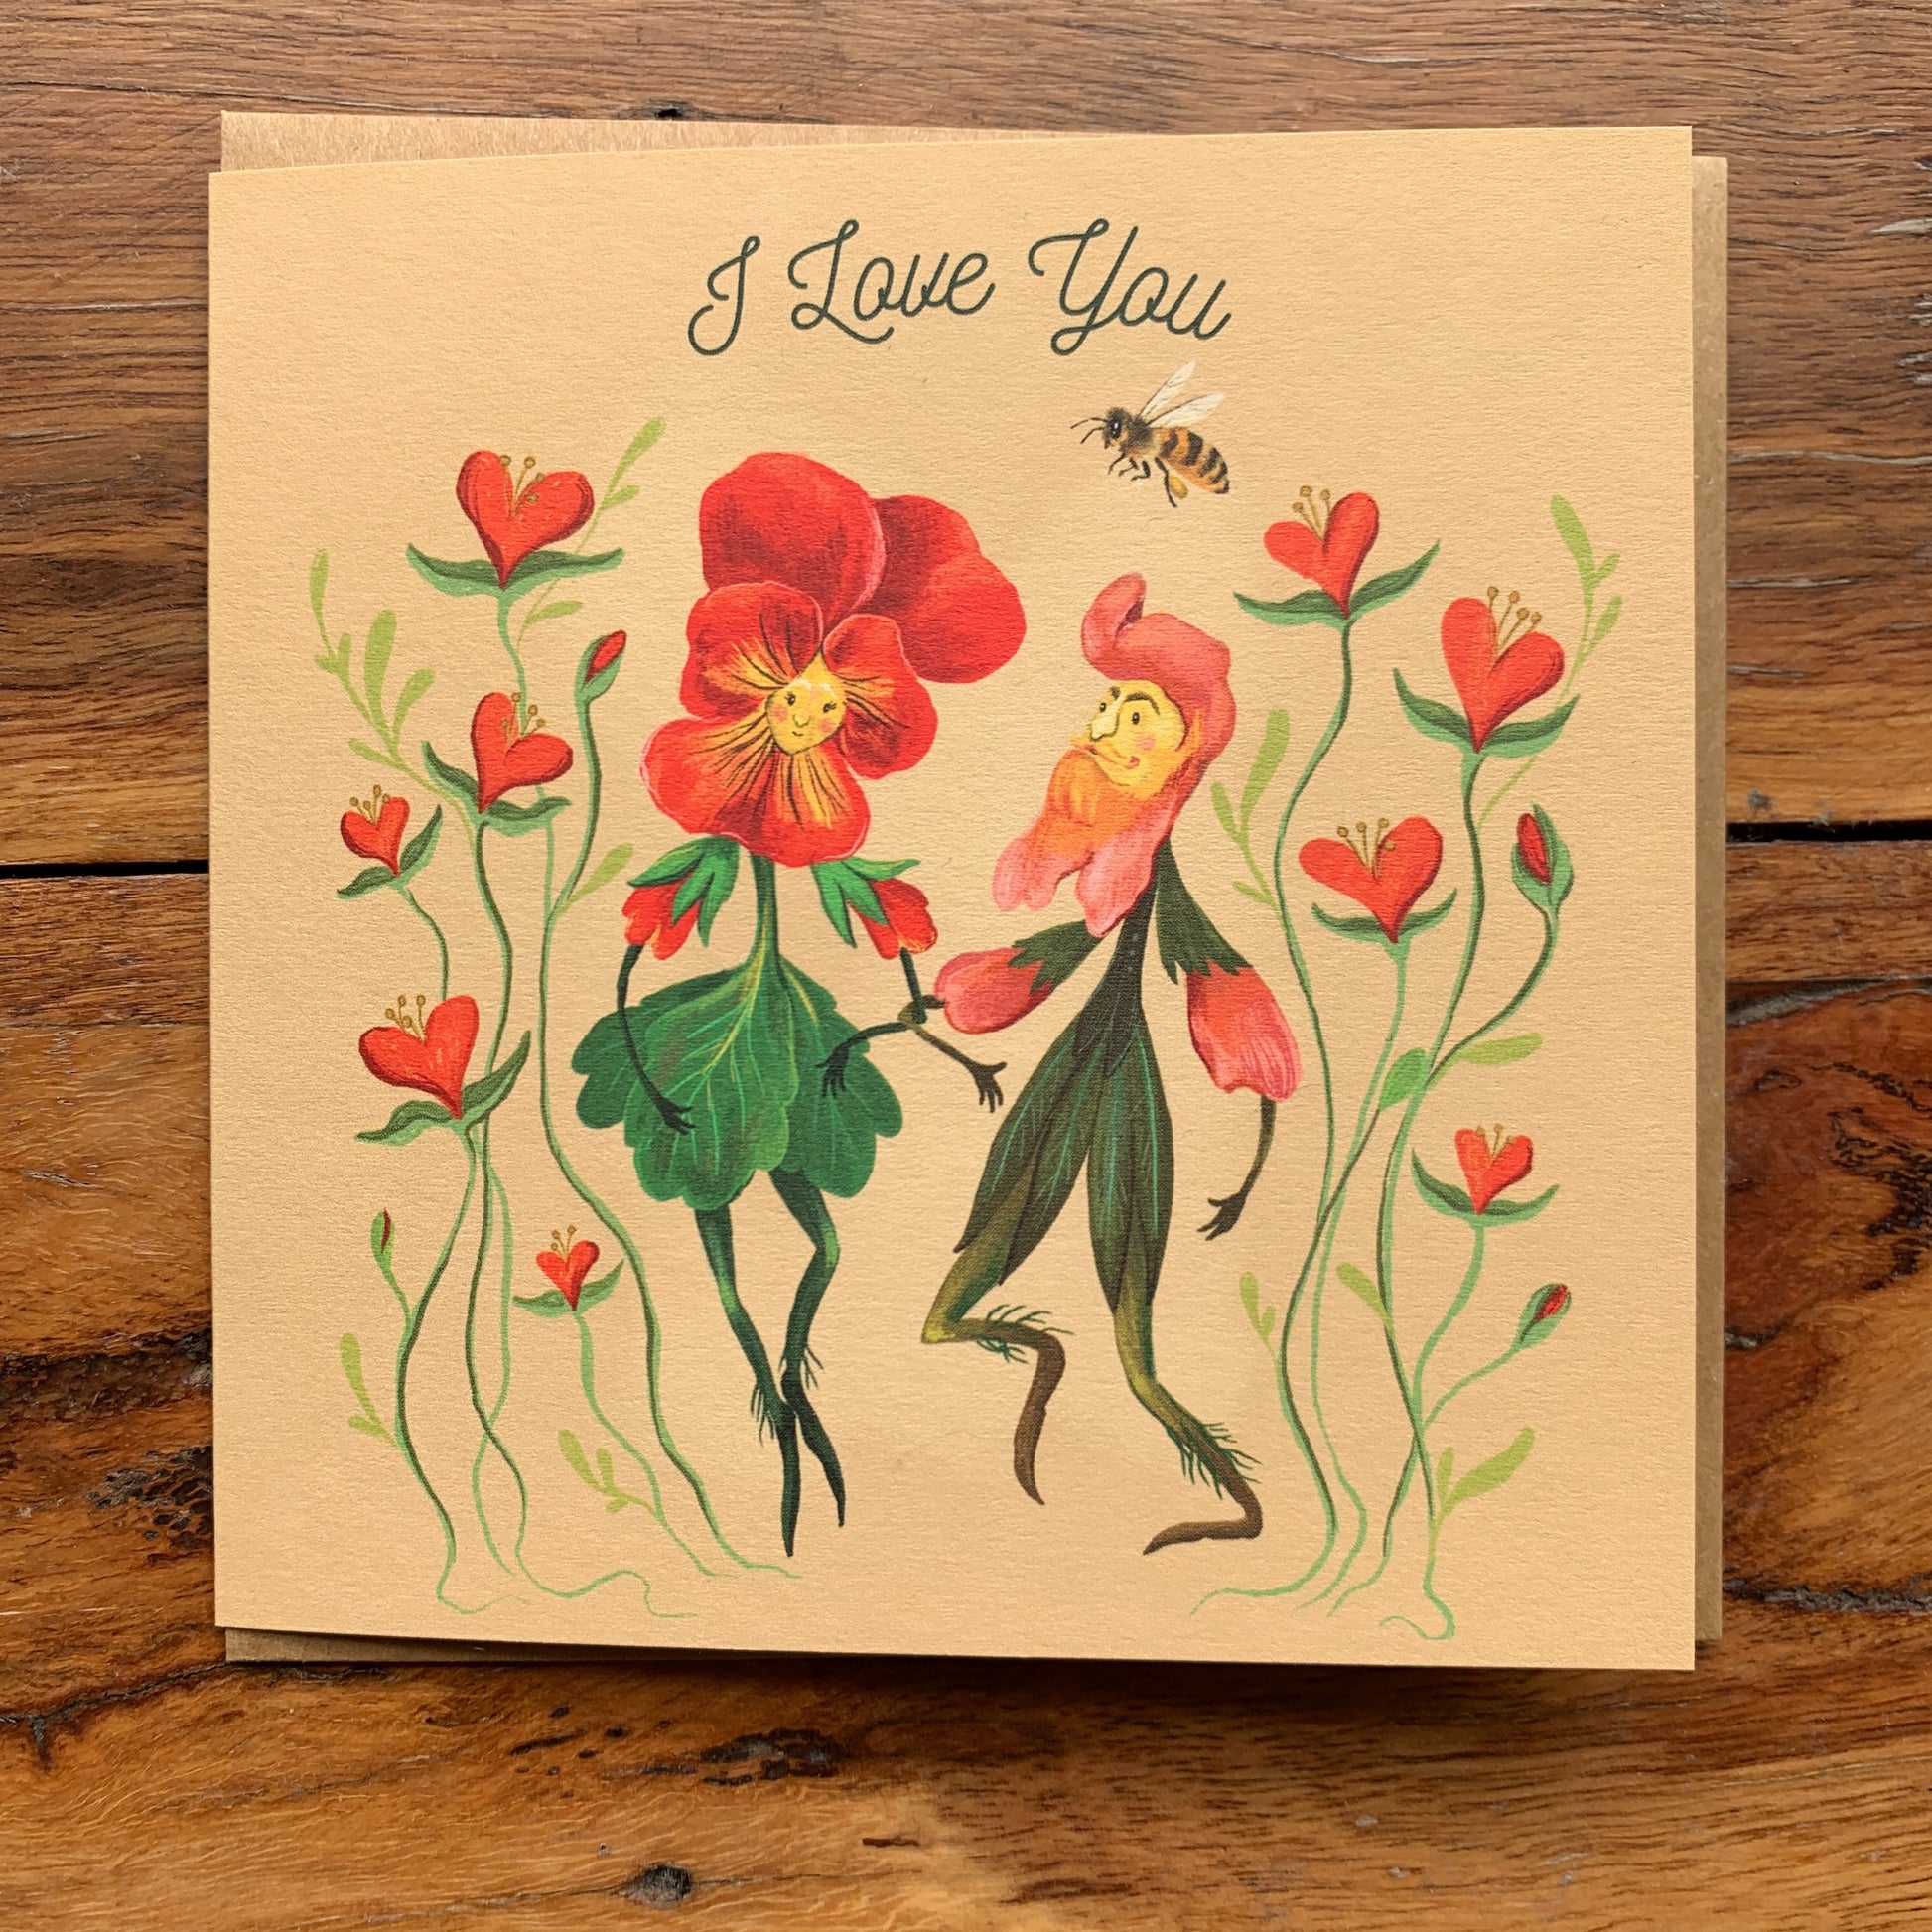 Anna Seed Art | Occasion Card - i love you. Cute flower illustration